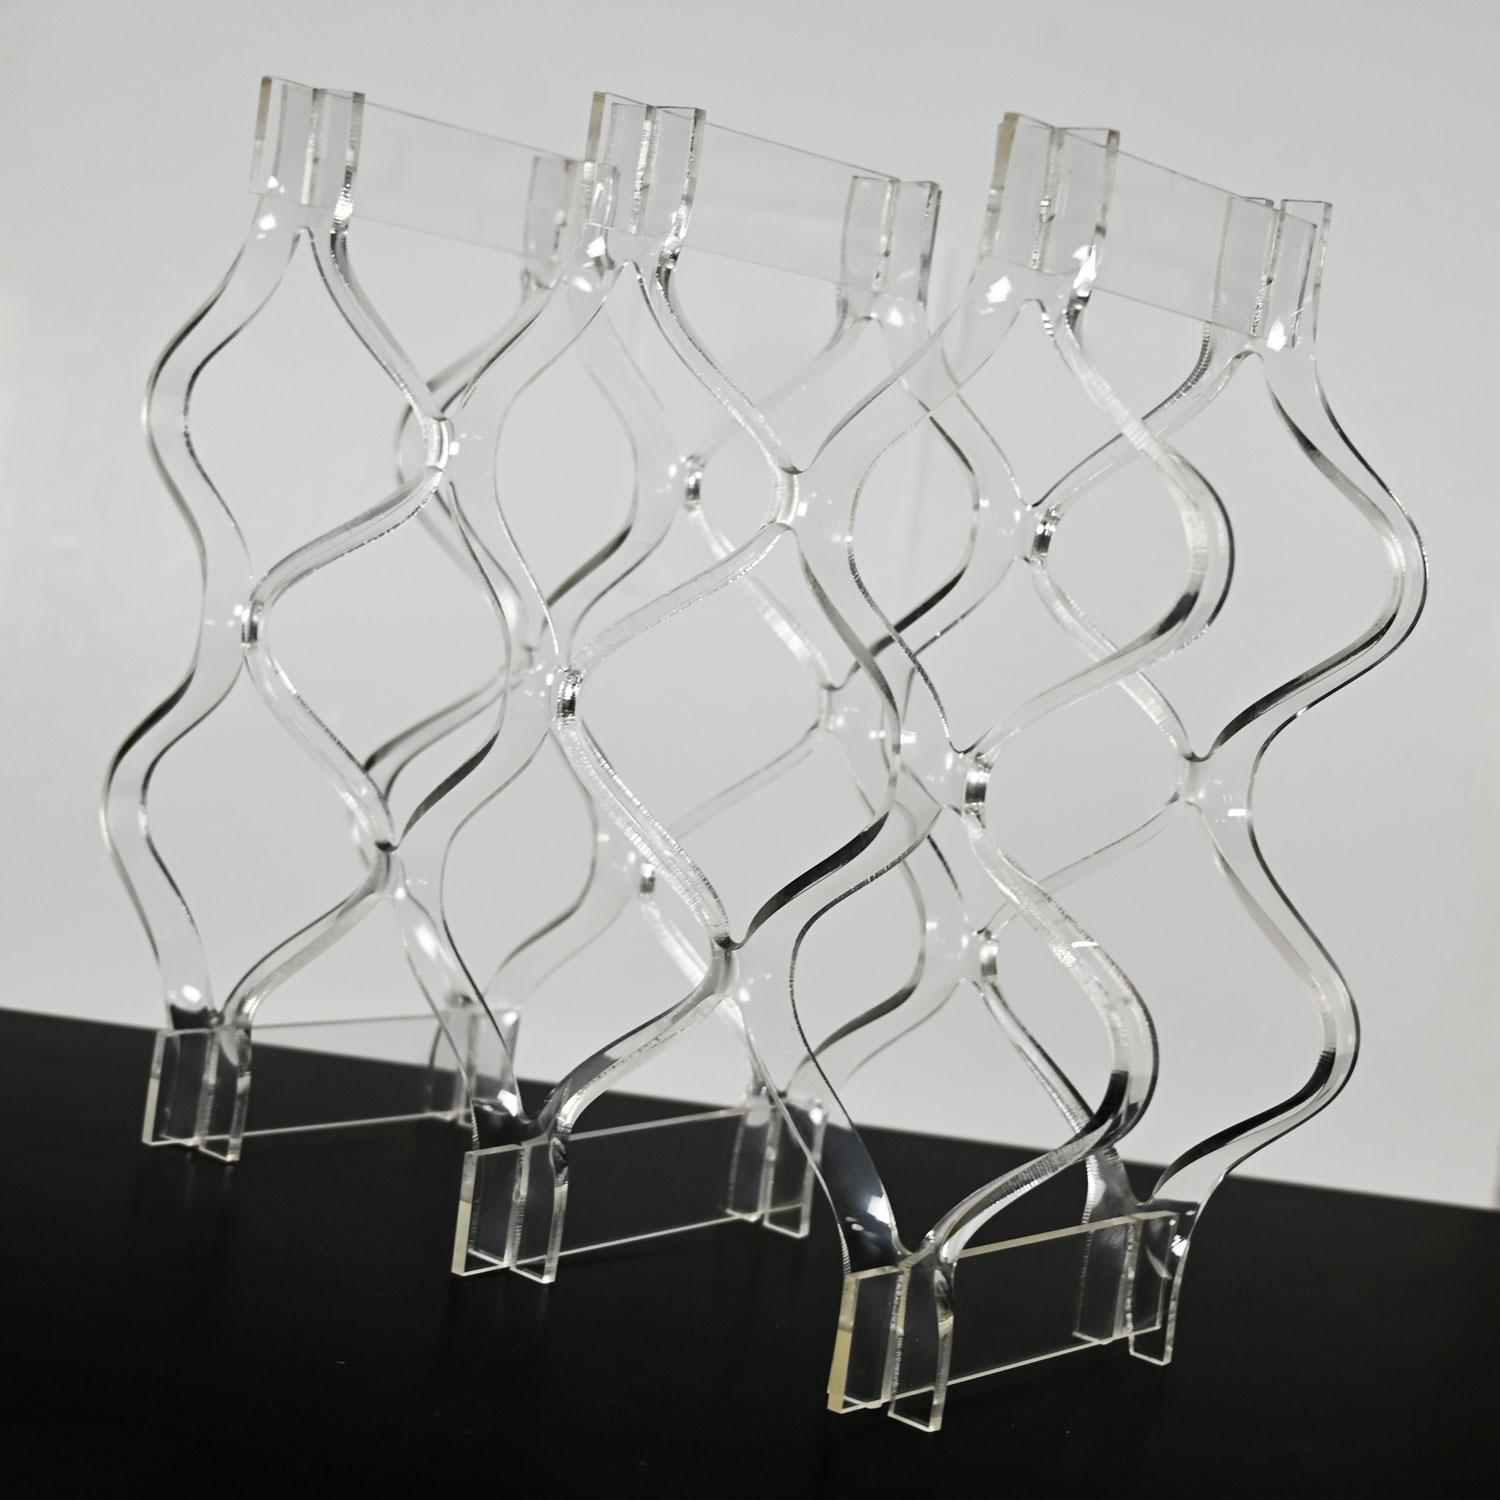 Lovely vintage Mid-Century Modern sculpted Lucite or plexiglass wine rack. Beautiful condition, keeping in mind that this is vintage and not new so will have signs of use and wear. Please see photos and zoom in for details. We attempt to portray any